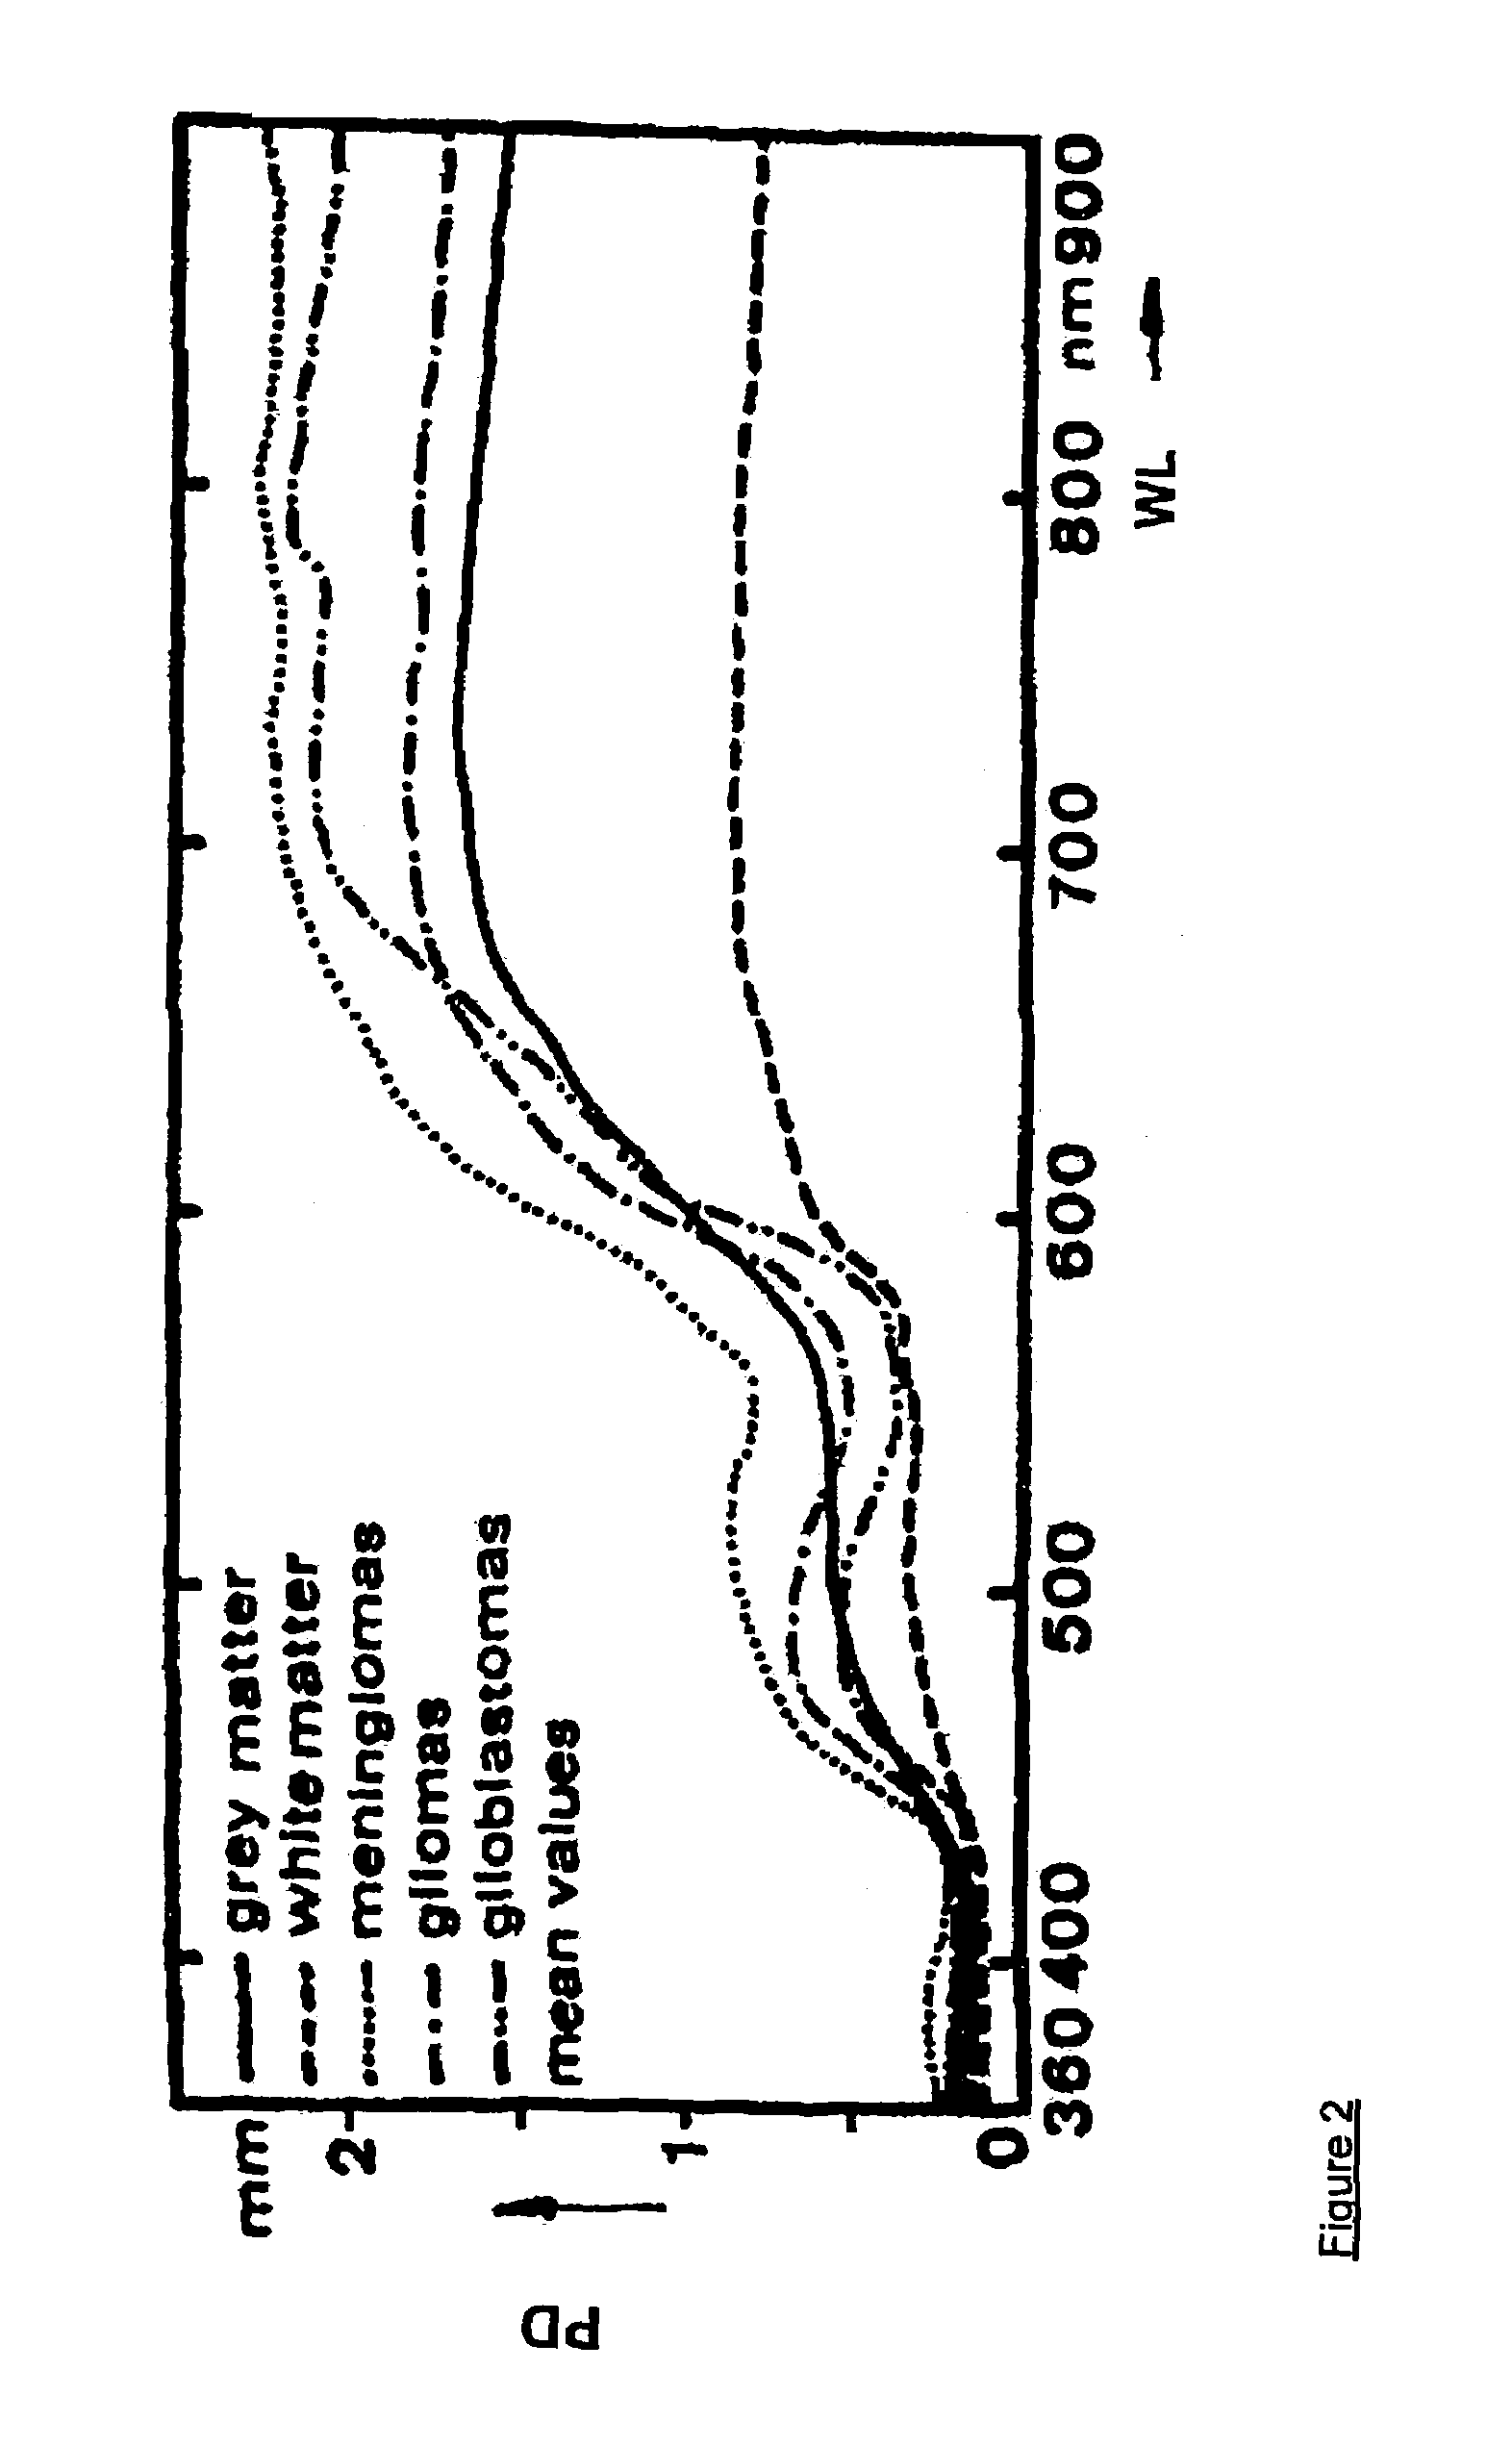 Apparatus and method for monitoring tissue vitality parameters